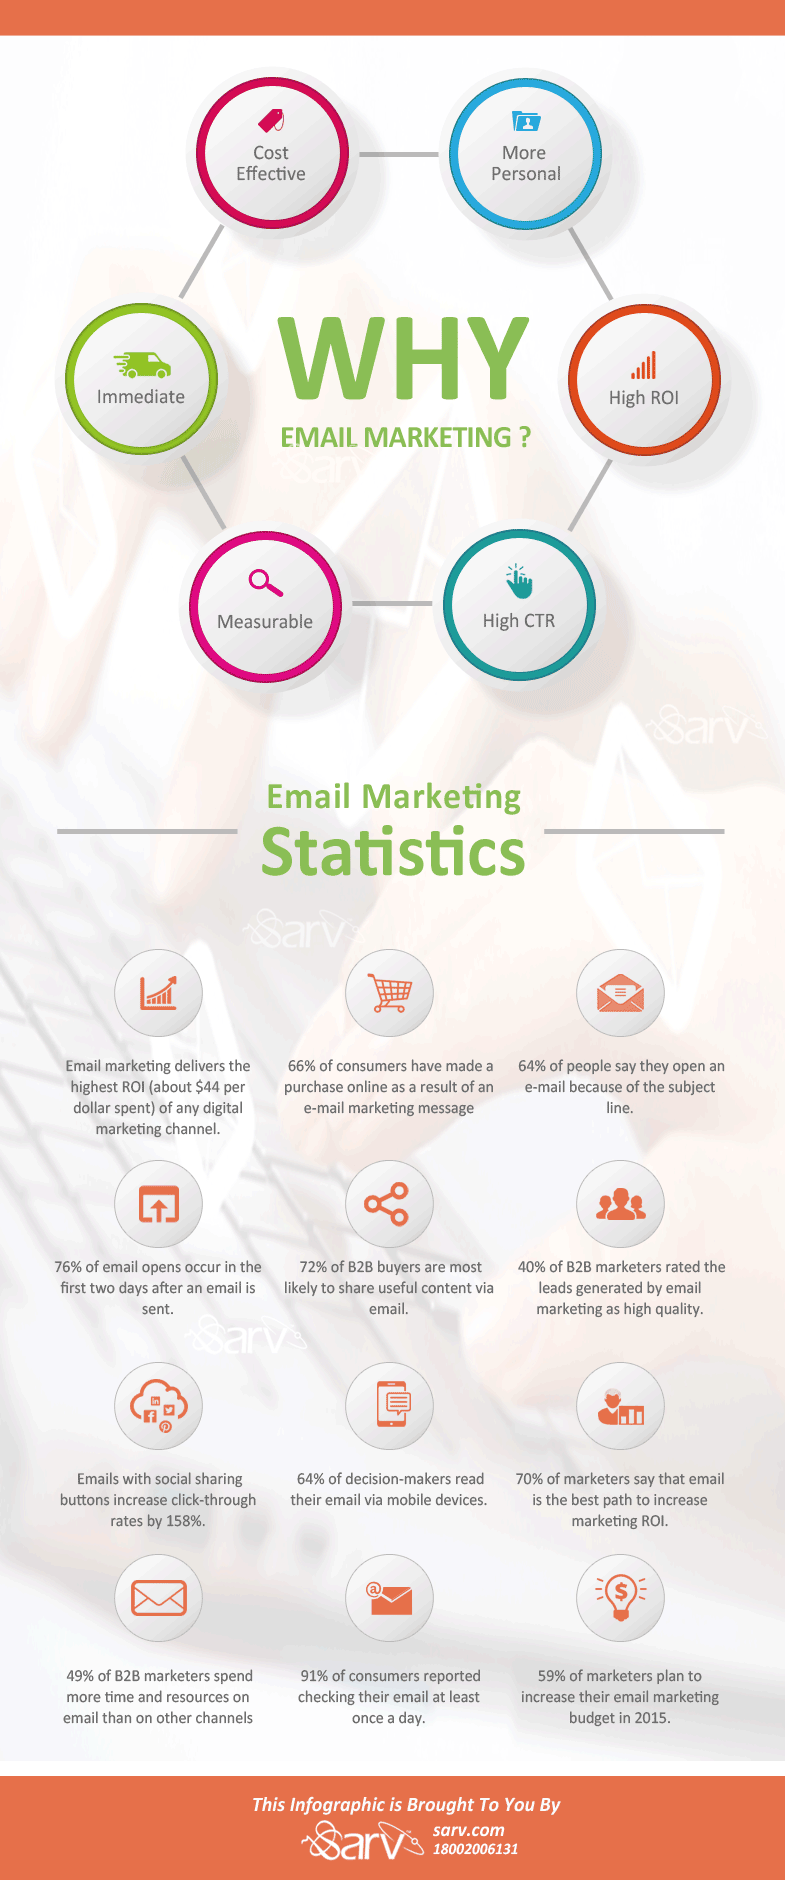 Email marketing statistics for 2015